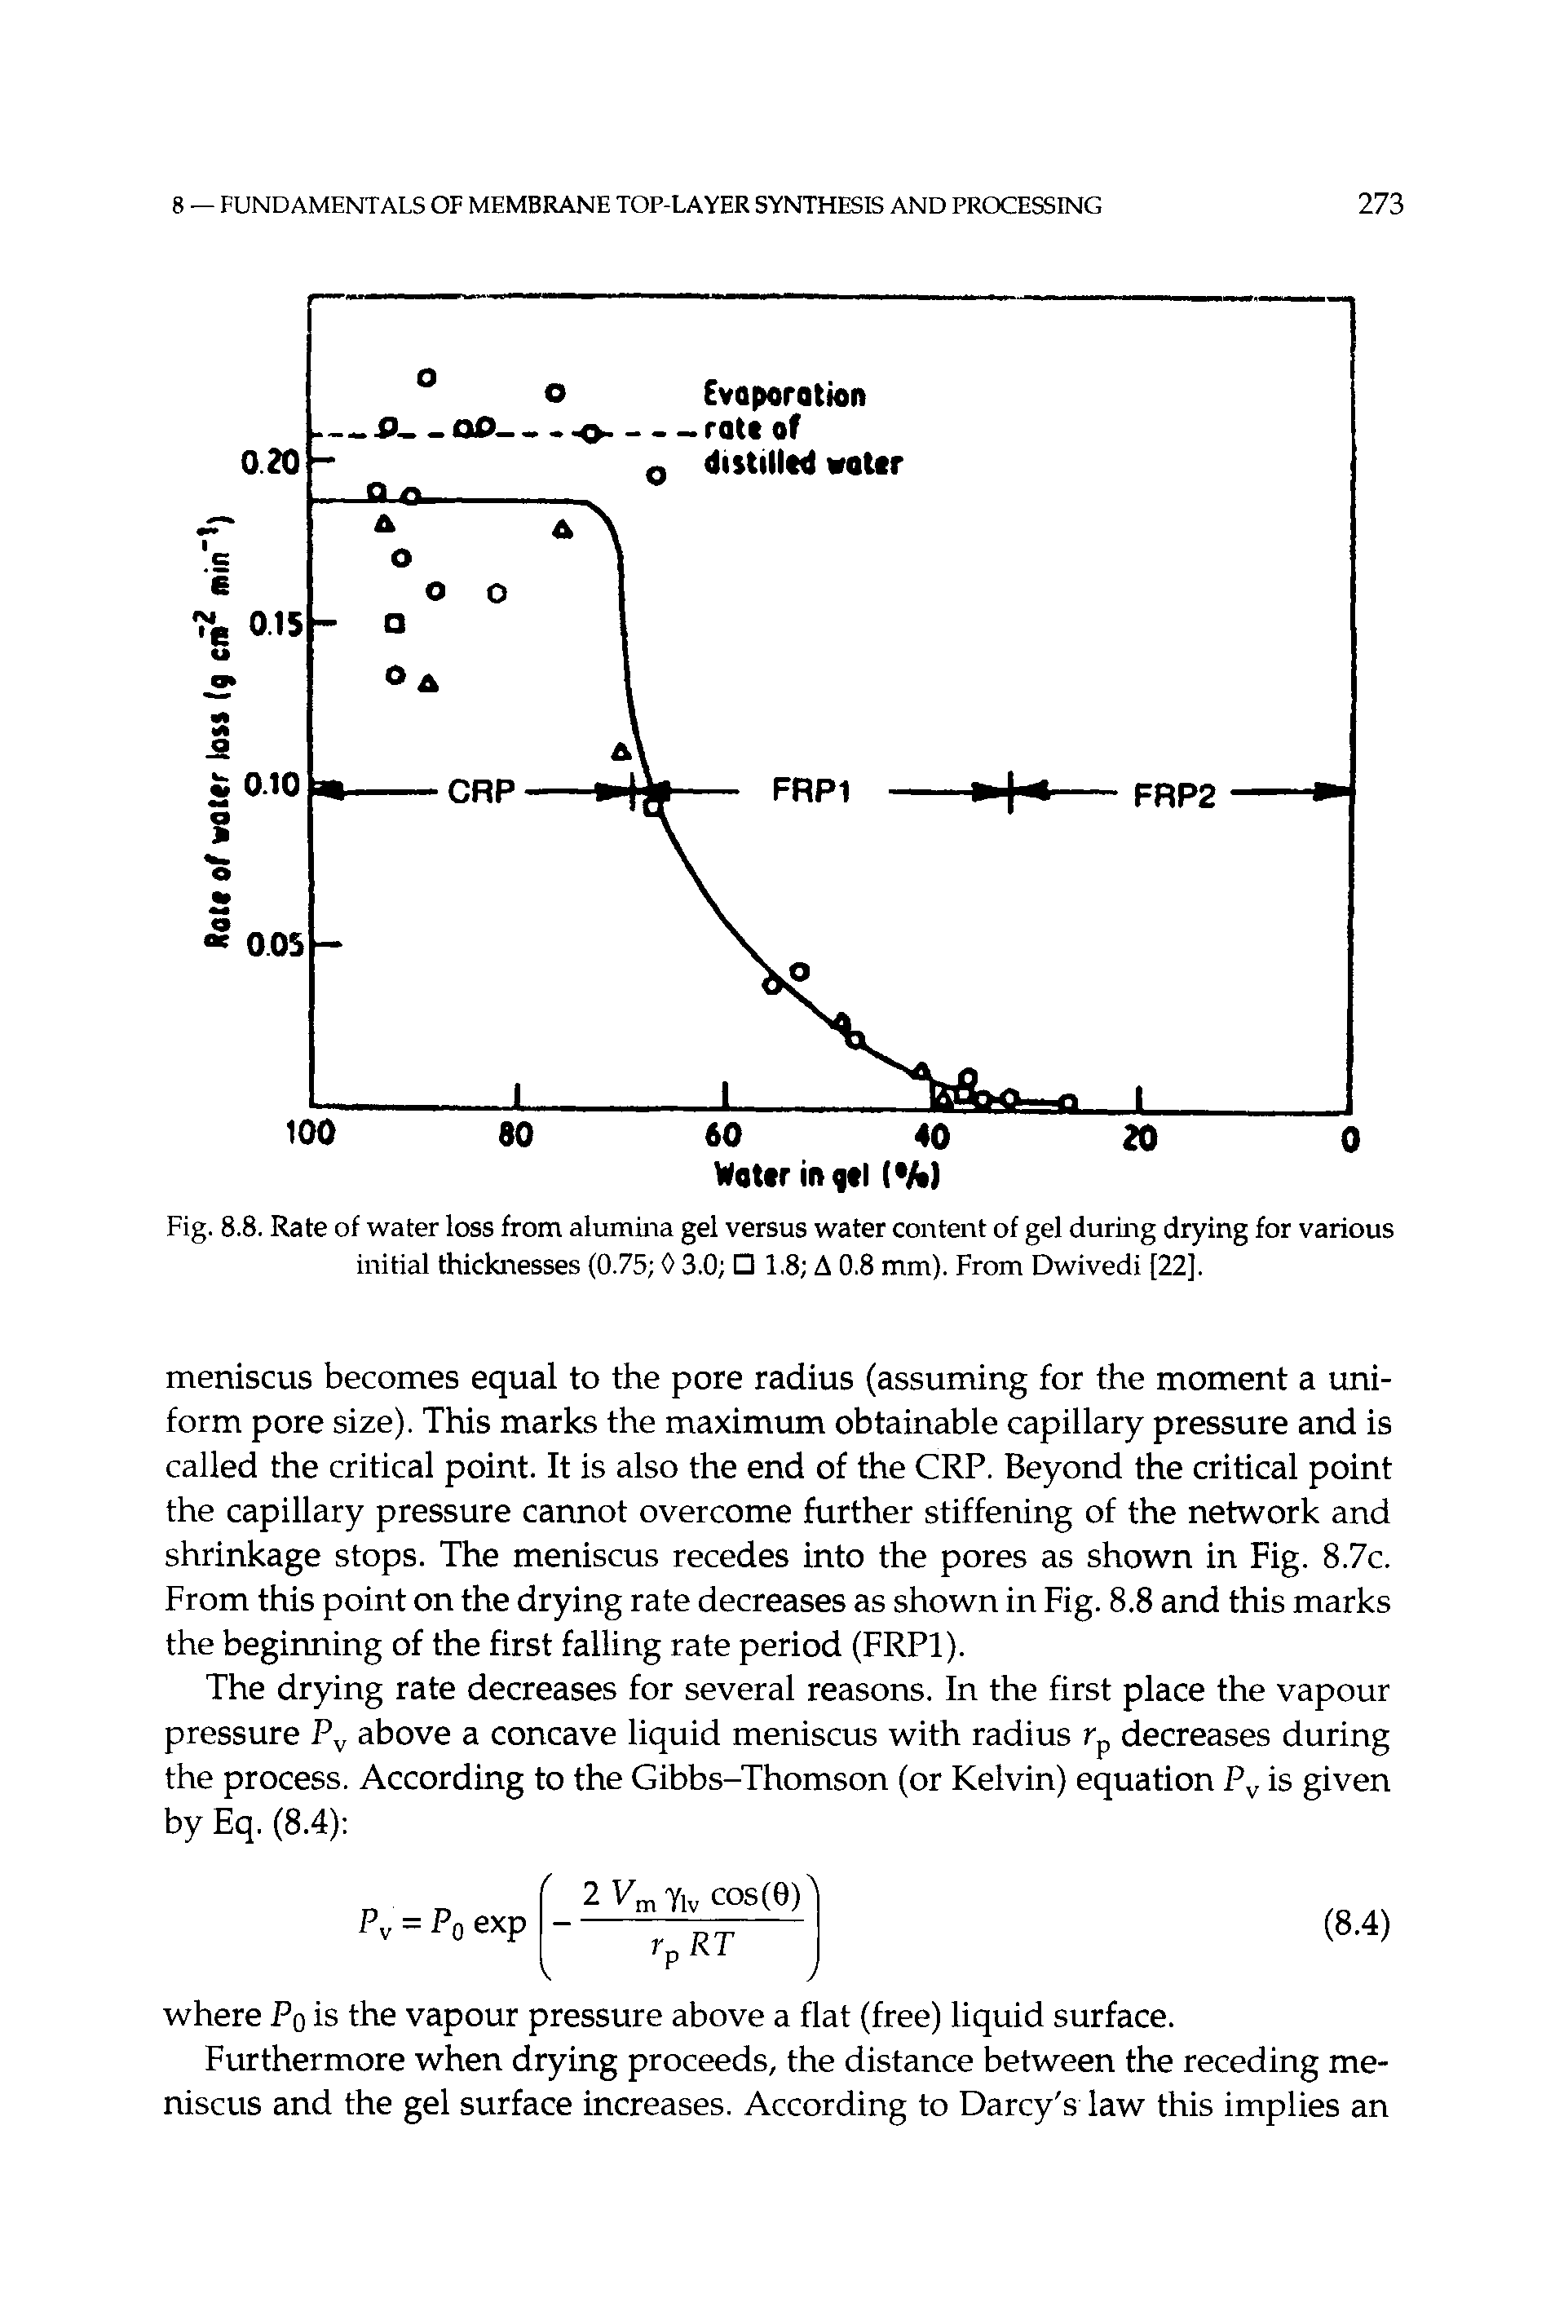 Fig. 8.8. Rate of water loss from alumina gel versus water content of gel during drying for various initial thicknesses (0.75 0 3.0 1.8 A 0.8 mm). From Dwivedi [22].